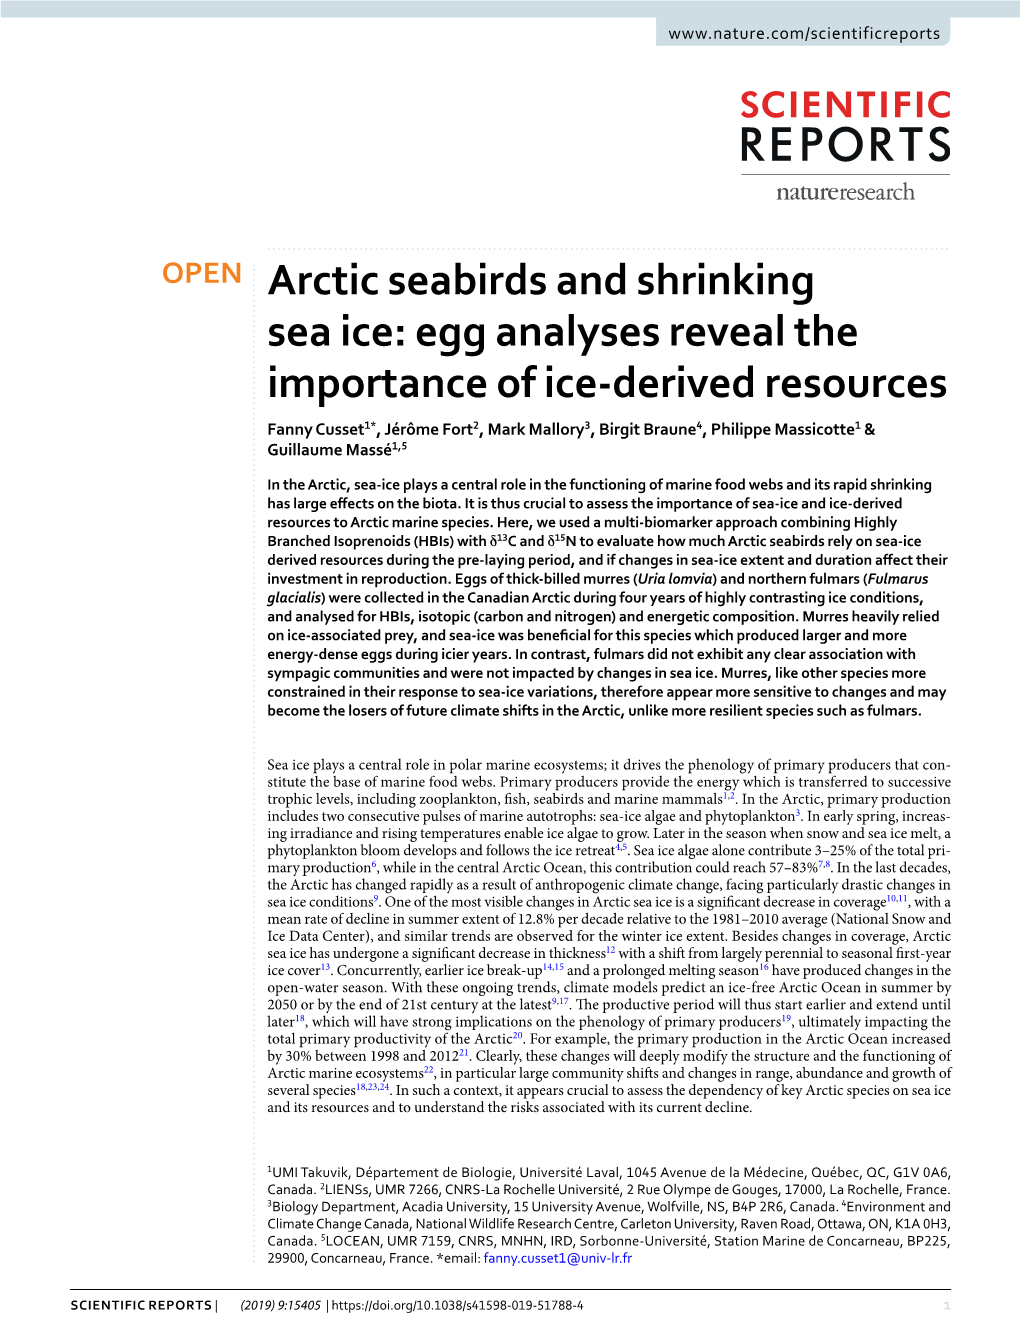 Arctic Seabirds and Shrinking Sea Ice: Egg Analyses Reveal the Importance